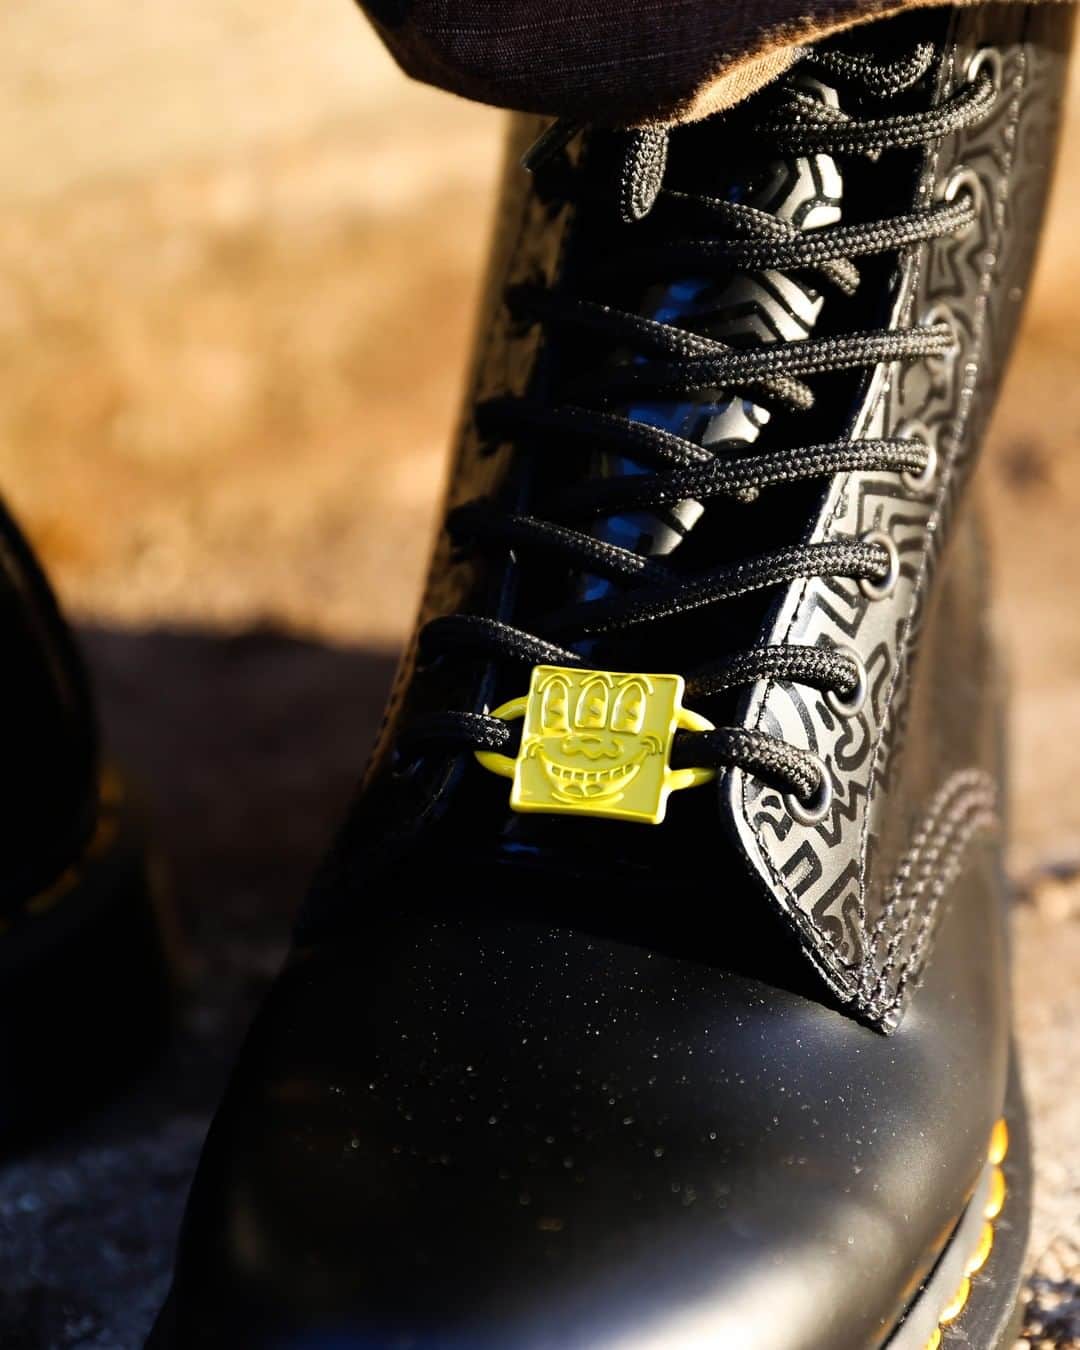 アトモスさんのインスタグラム写真 - (アトモスInstagram)「. 1/22(FRI)よりDr.Martens × Keith Haringが登場。 アメリカ、ペンシルベニア出身のキース・へリング。「ストリートアートのパイオニア」とされる彼とDr.Martens初のコラボレーションとなる。誰もがすぐに認識できるキースのアートを、オリジナルのIconsにプリント。グラフィックのディテールをブラックで施したスムースレザーをアッパー全体に用いた1460ブーツは、彼の大胆かつ刺激的なキャラクター入りのストリップをヒールにあしらっており、1461シューズにはホワイトのスムースレザーを用いてキース定番のデザインで装飾。そのアイコニックなキャラクターを全体にプリントを施す。この初となるコラボレーションで、ドクターマーチンはキースの限界に挑む作品に敬意を表する。 . Dr. Martens x Keith Haring appears from 1/22 (FRI). Keith Herring from Pennsylvania, USA. This is Dr. Martens' first collaboration with him, who is considered to be a "pioneer of street art". Keith's art that anyone can immediately recognize is printed on the original Icons. The 1460 boots, with black smooth leather with graphic details throughout the upper, feature strips with his bold and inspiring character on the heel. And the 1461 shoes are Keith with white smooth leather and decorated with a classic design. The iconic character is printed on the whole upper. In this first collaboration, Dr. Martens pays homage to Keith's life and push to the limits for the products. . #atmos #drmartens #keithharing #martens #streetart #アトモス #ドクターマーチン」1月21日 13時00分 - atmos_japan